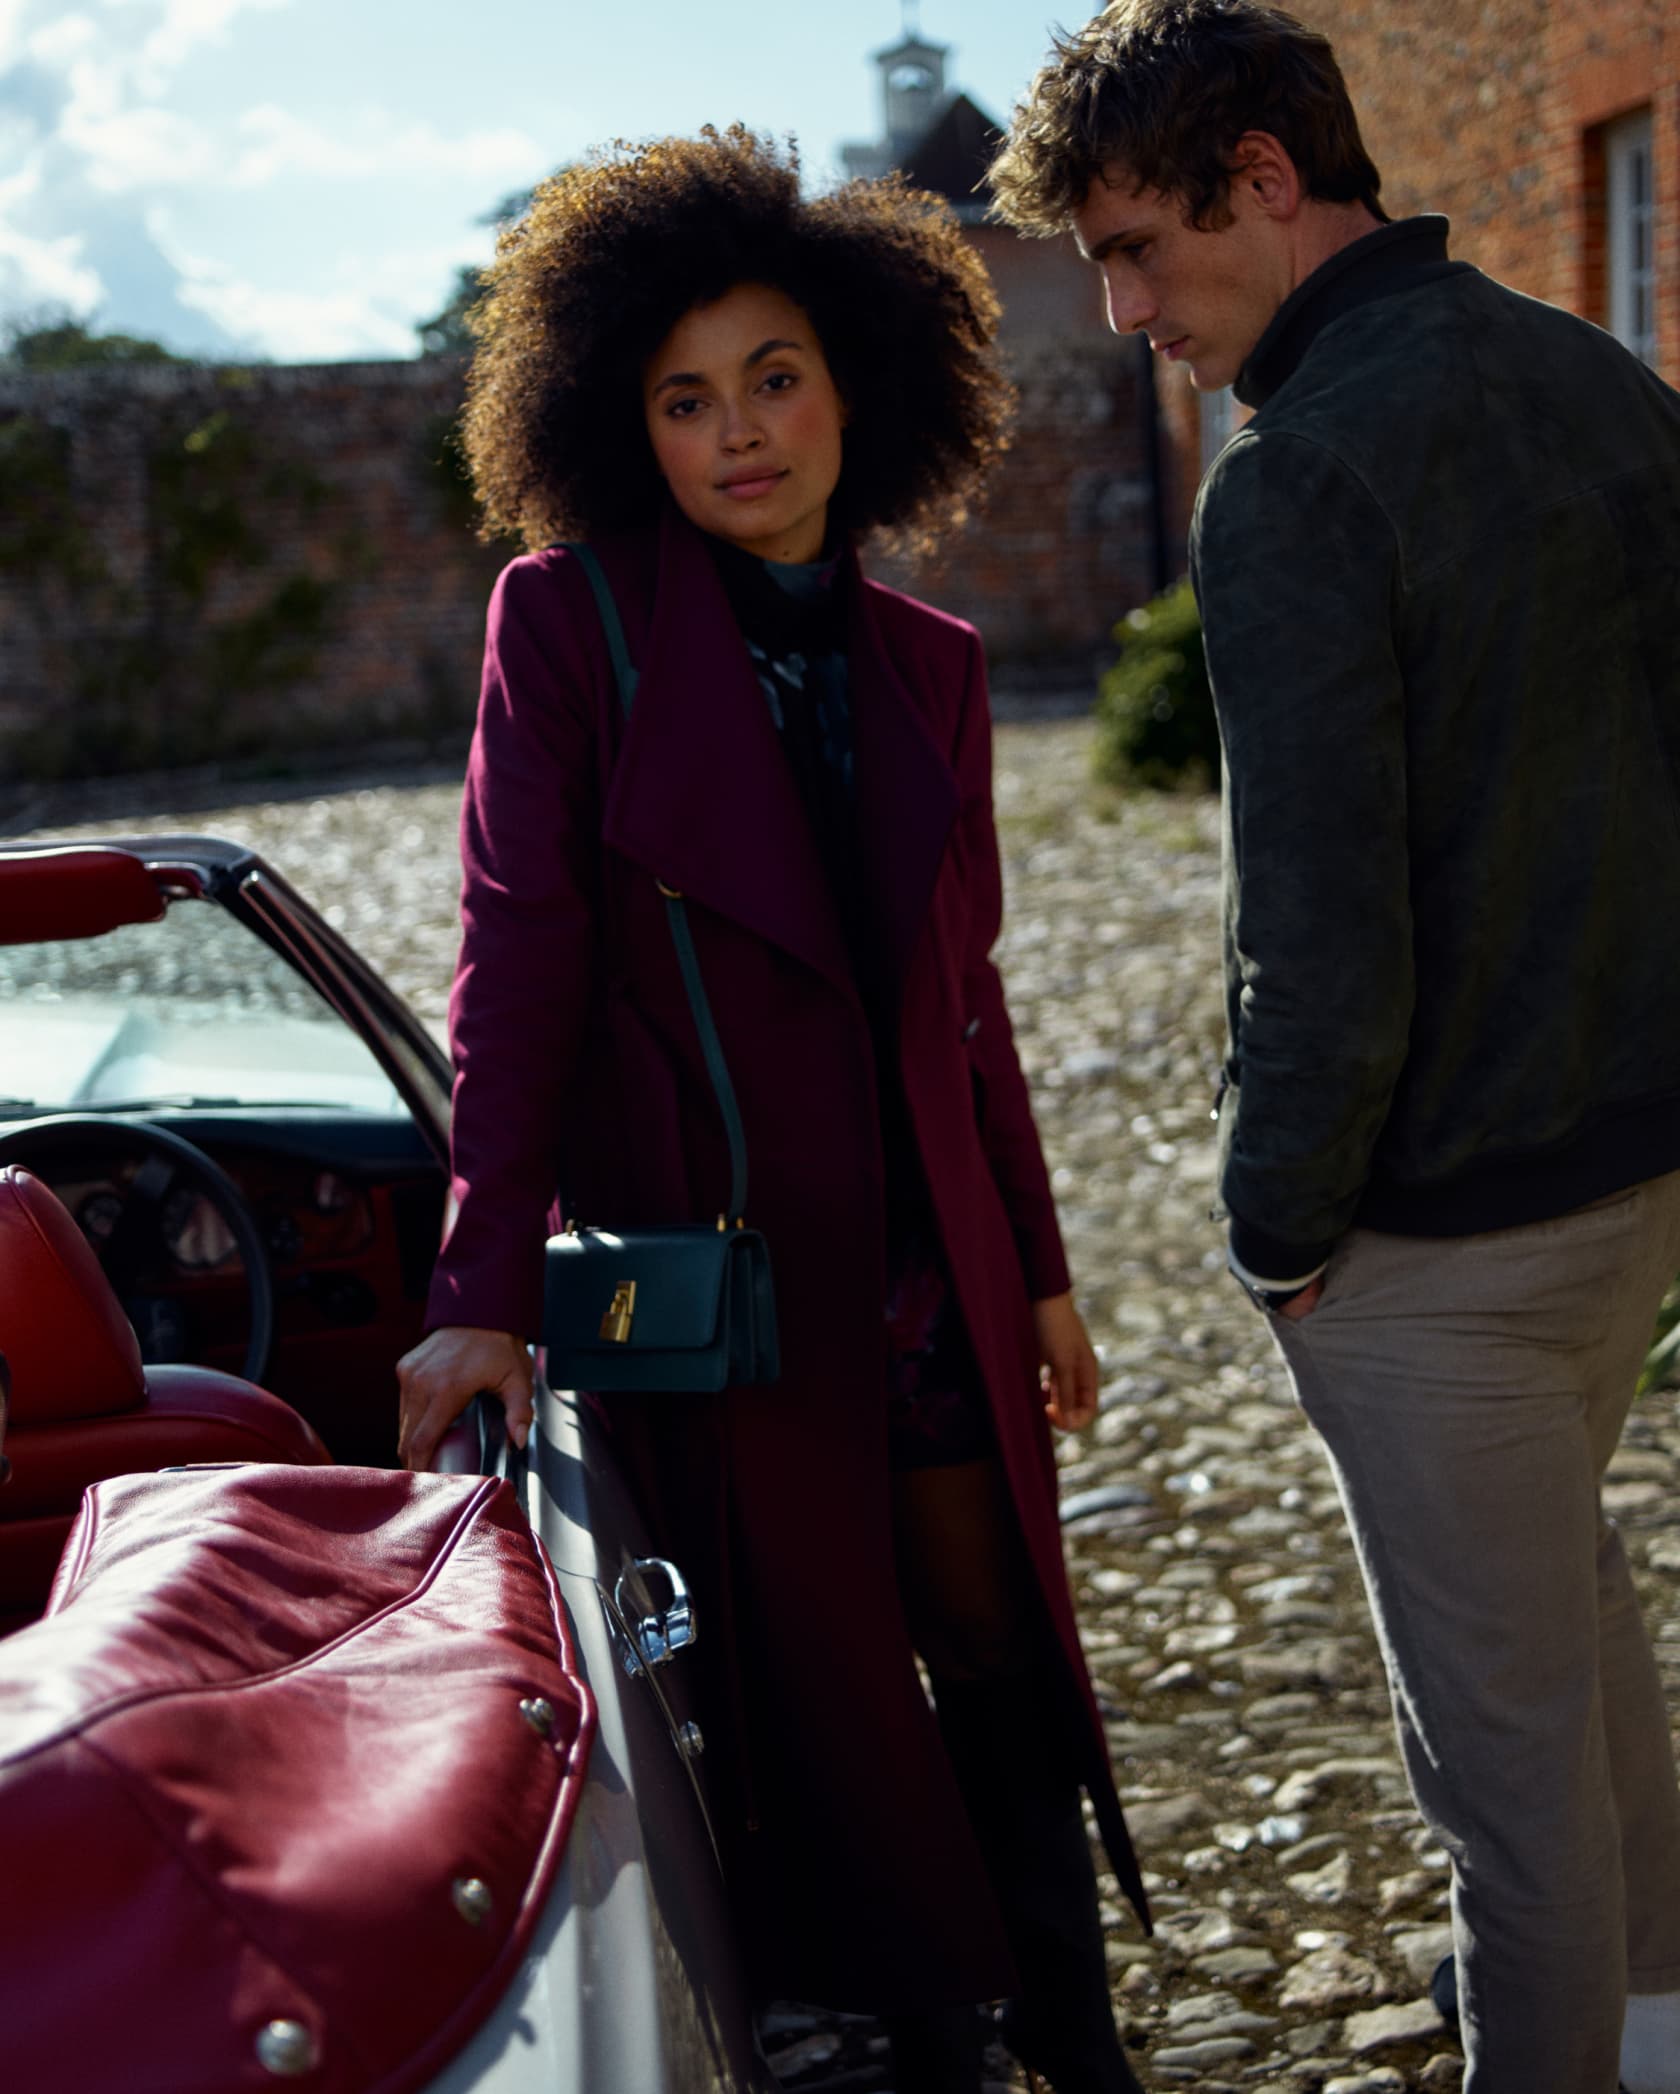 Woman and man in Ted Baker outerwear, woman in a red burgundy coat, man in a green khaki jacket